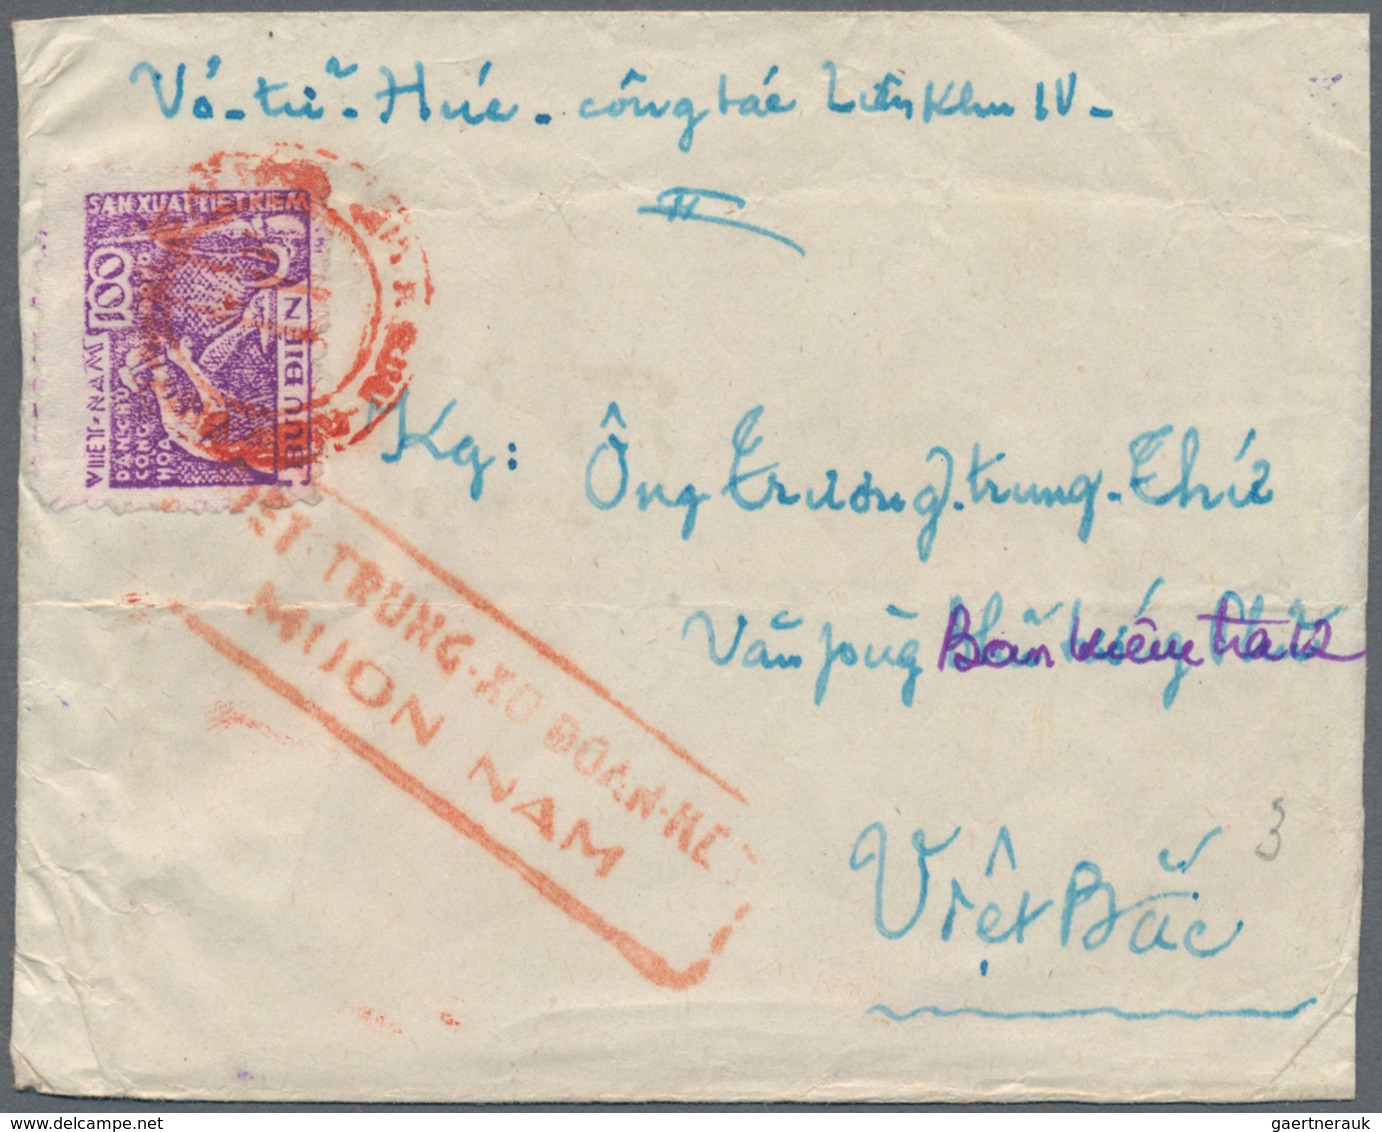 Vietnam-Nord (1945-1975): 1954, Cover From The 4th Interzone, Addressed To Service Station 12, Beari - Vietnam